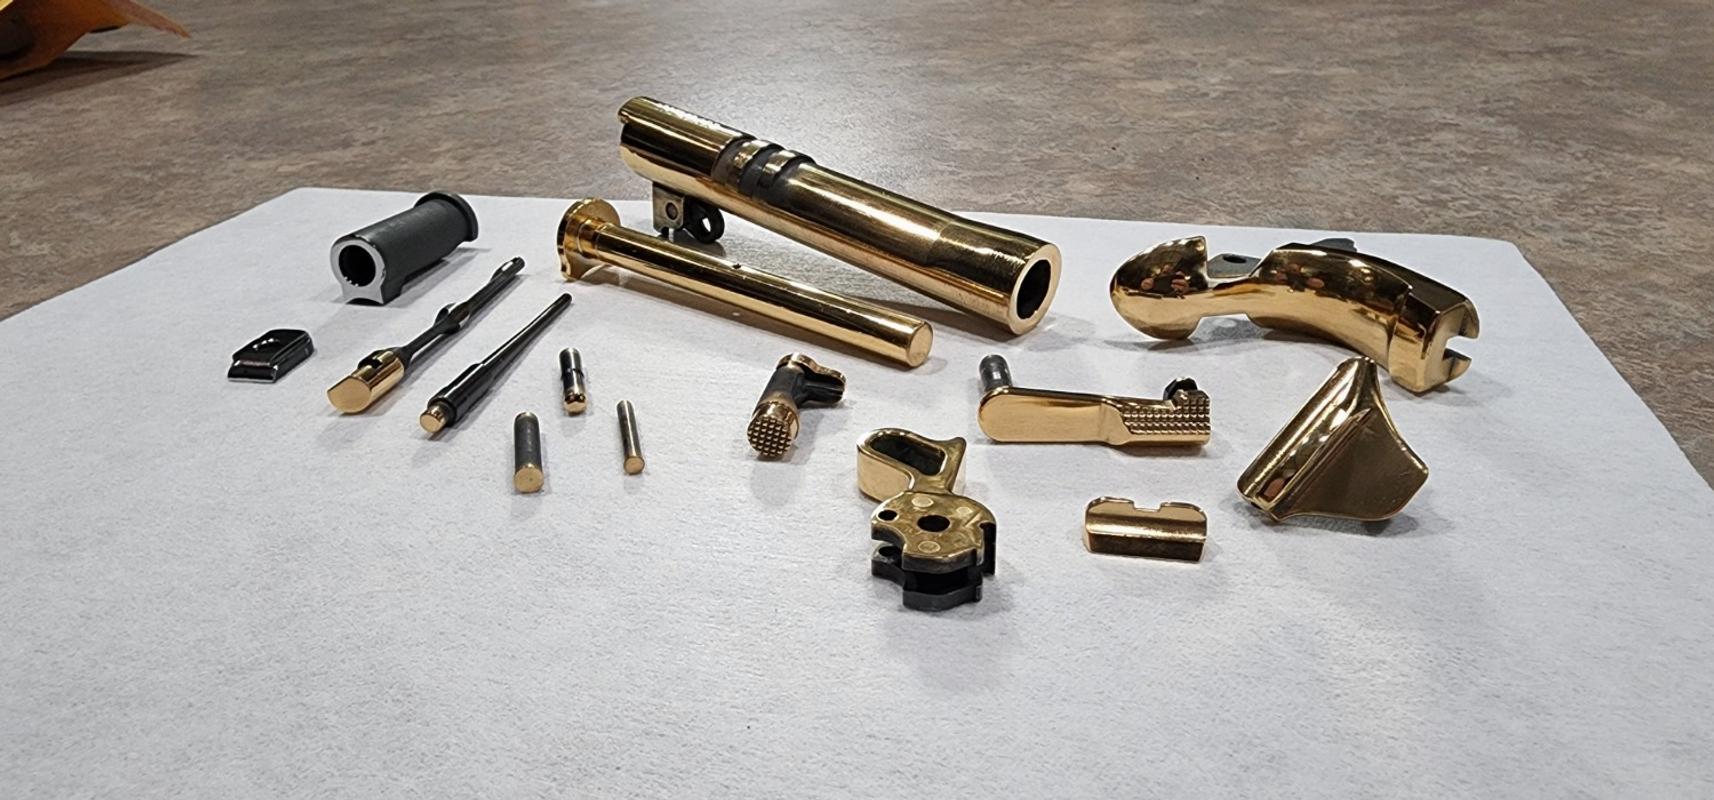 Gold Star Plating Kit – Gold Plating Services